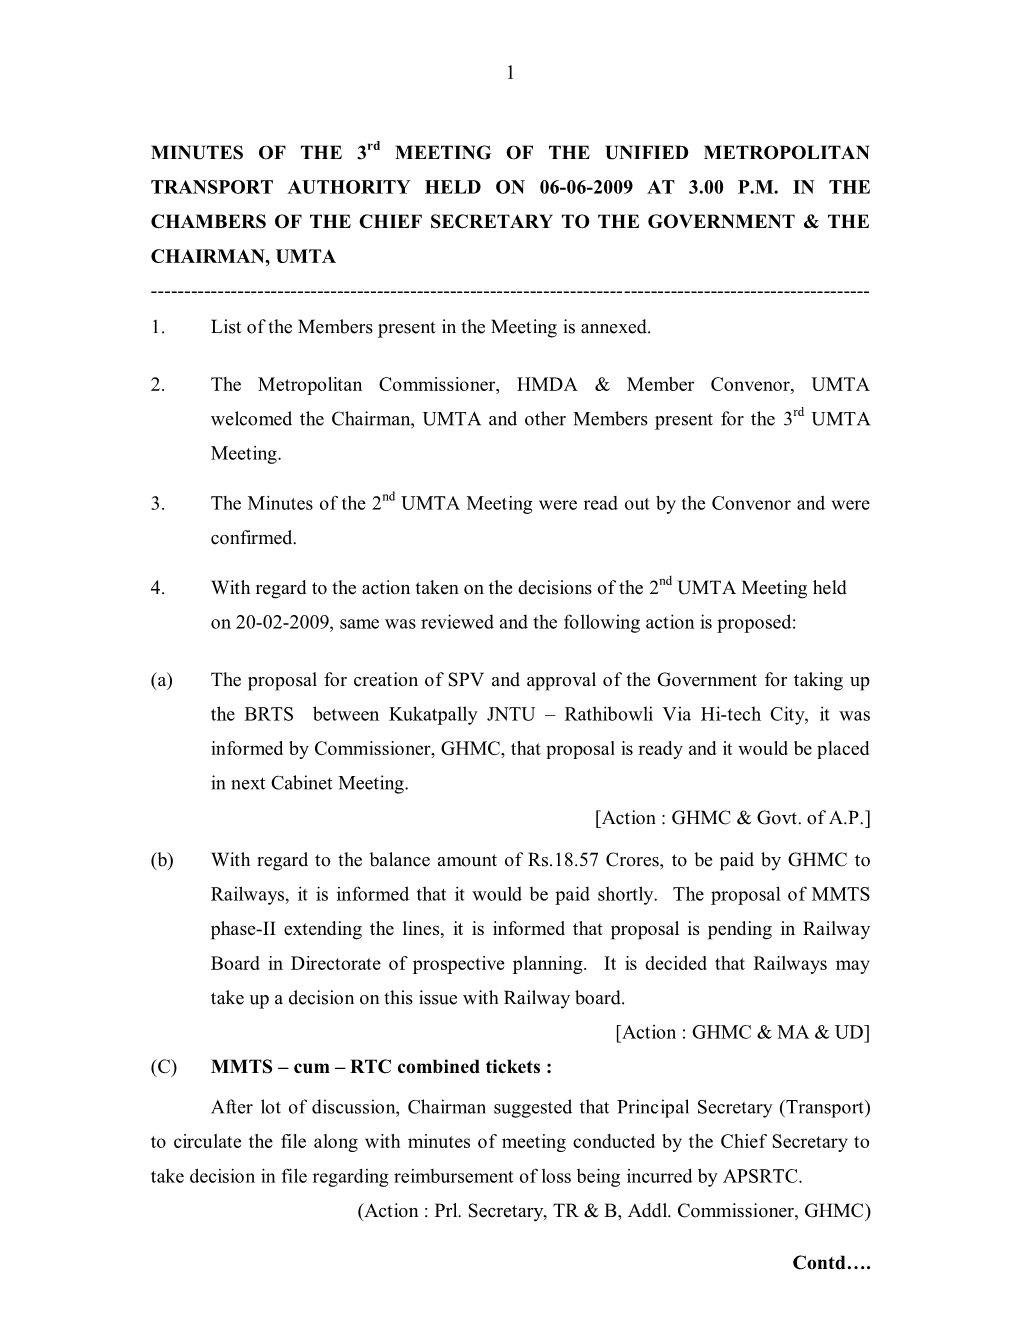 Minutes of the 2Nd Meeting of the Unified Metropolitan Transport Authority Held on 20-02-2009 at 3